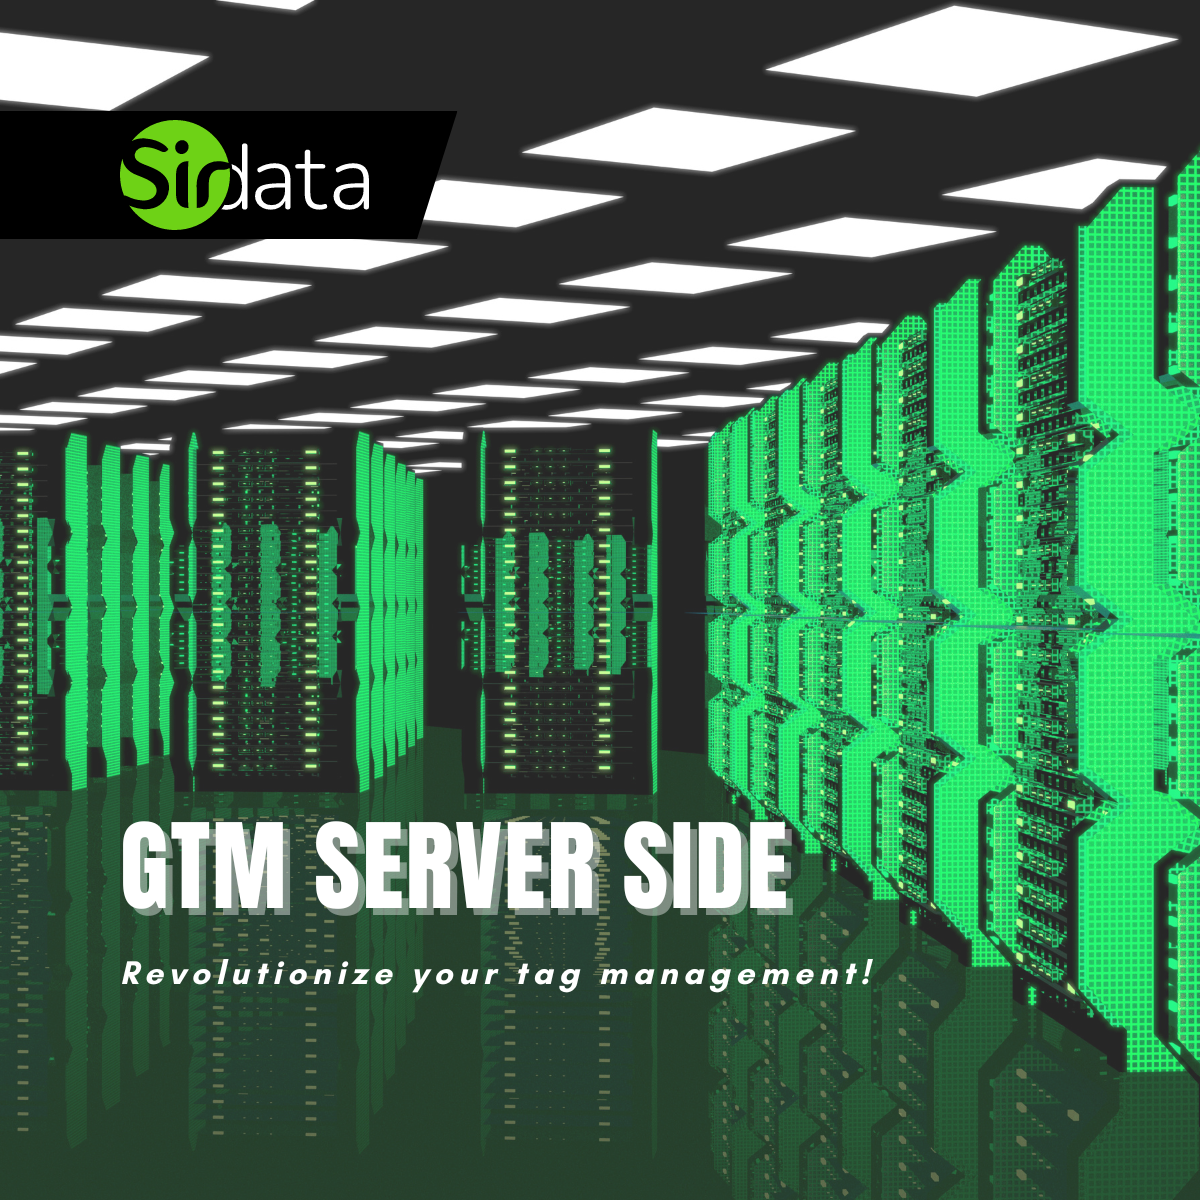 GTM Server-Side?  But Why?